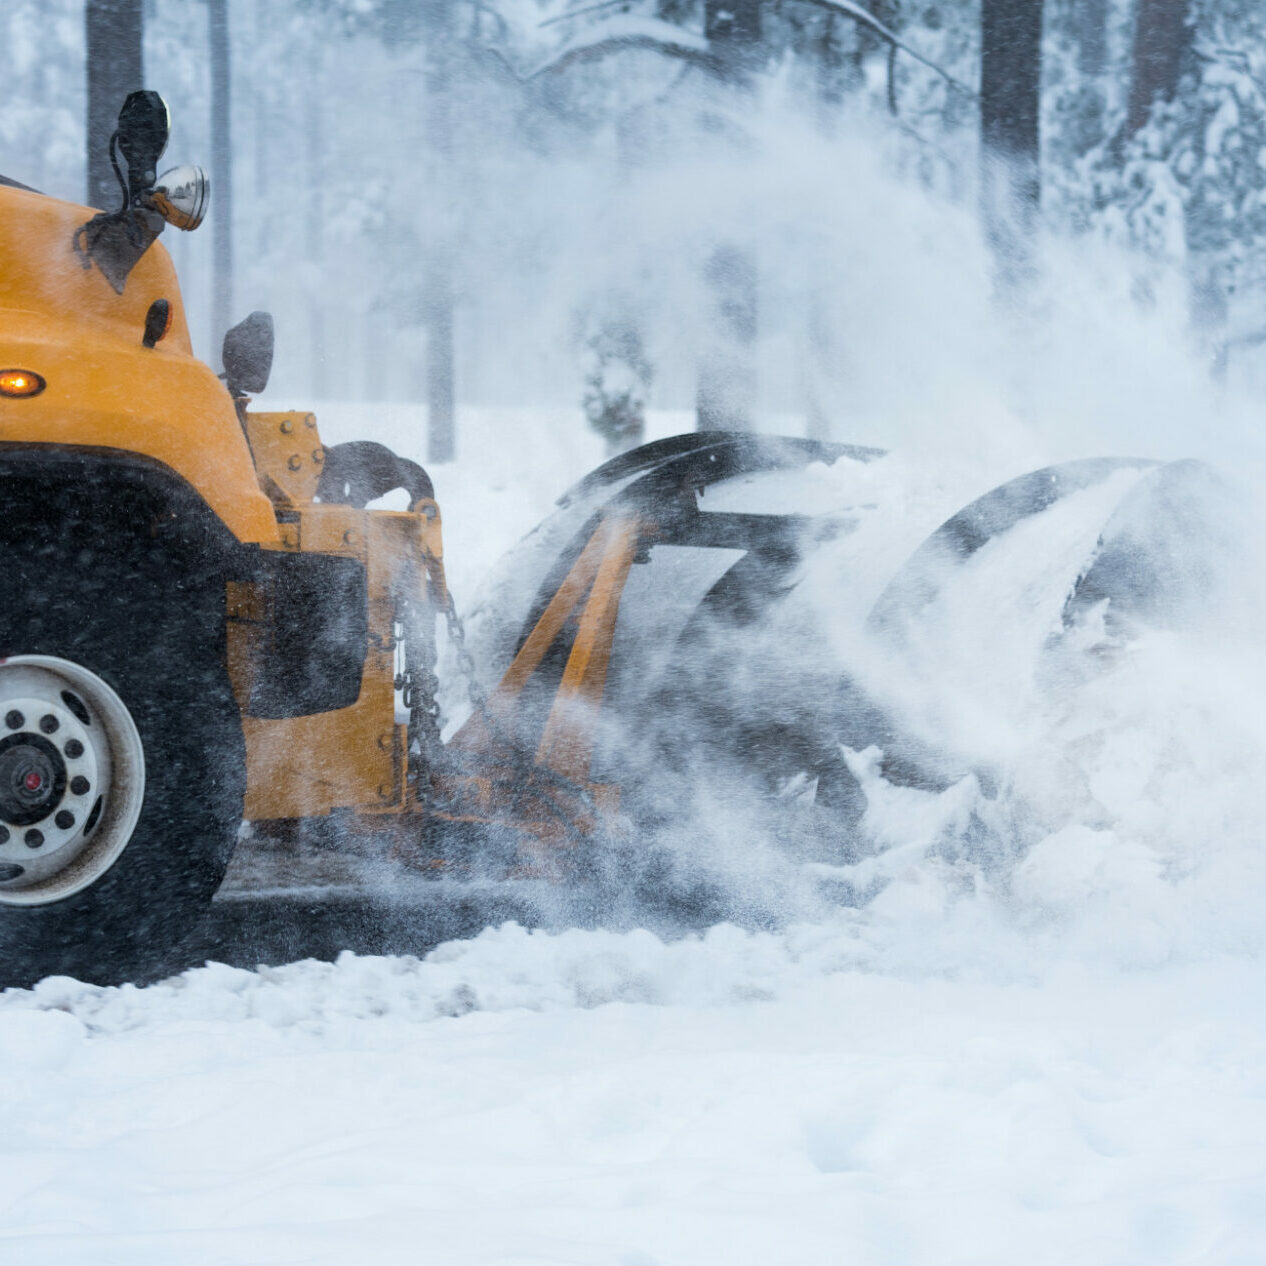 snow-plow-at-work_t20_rRpAPd